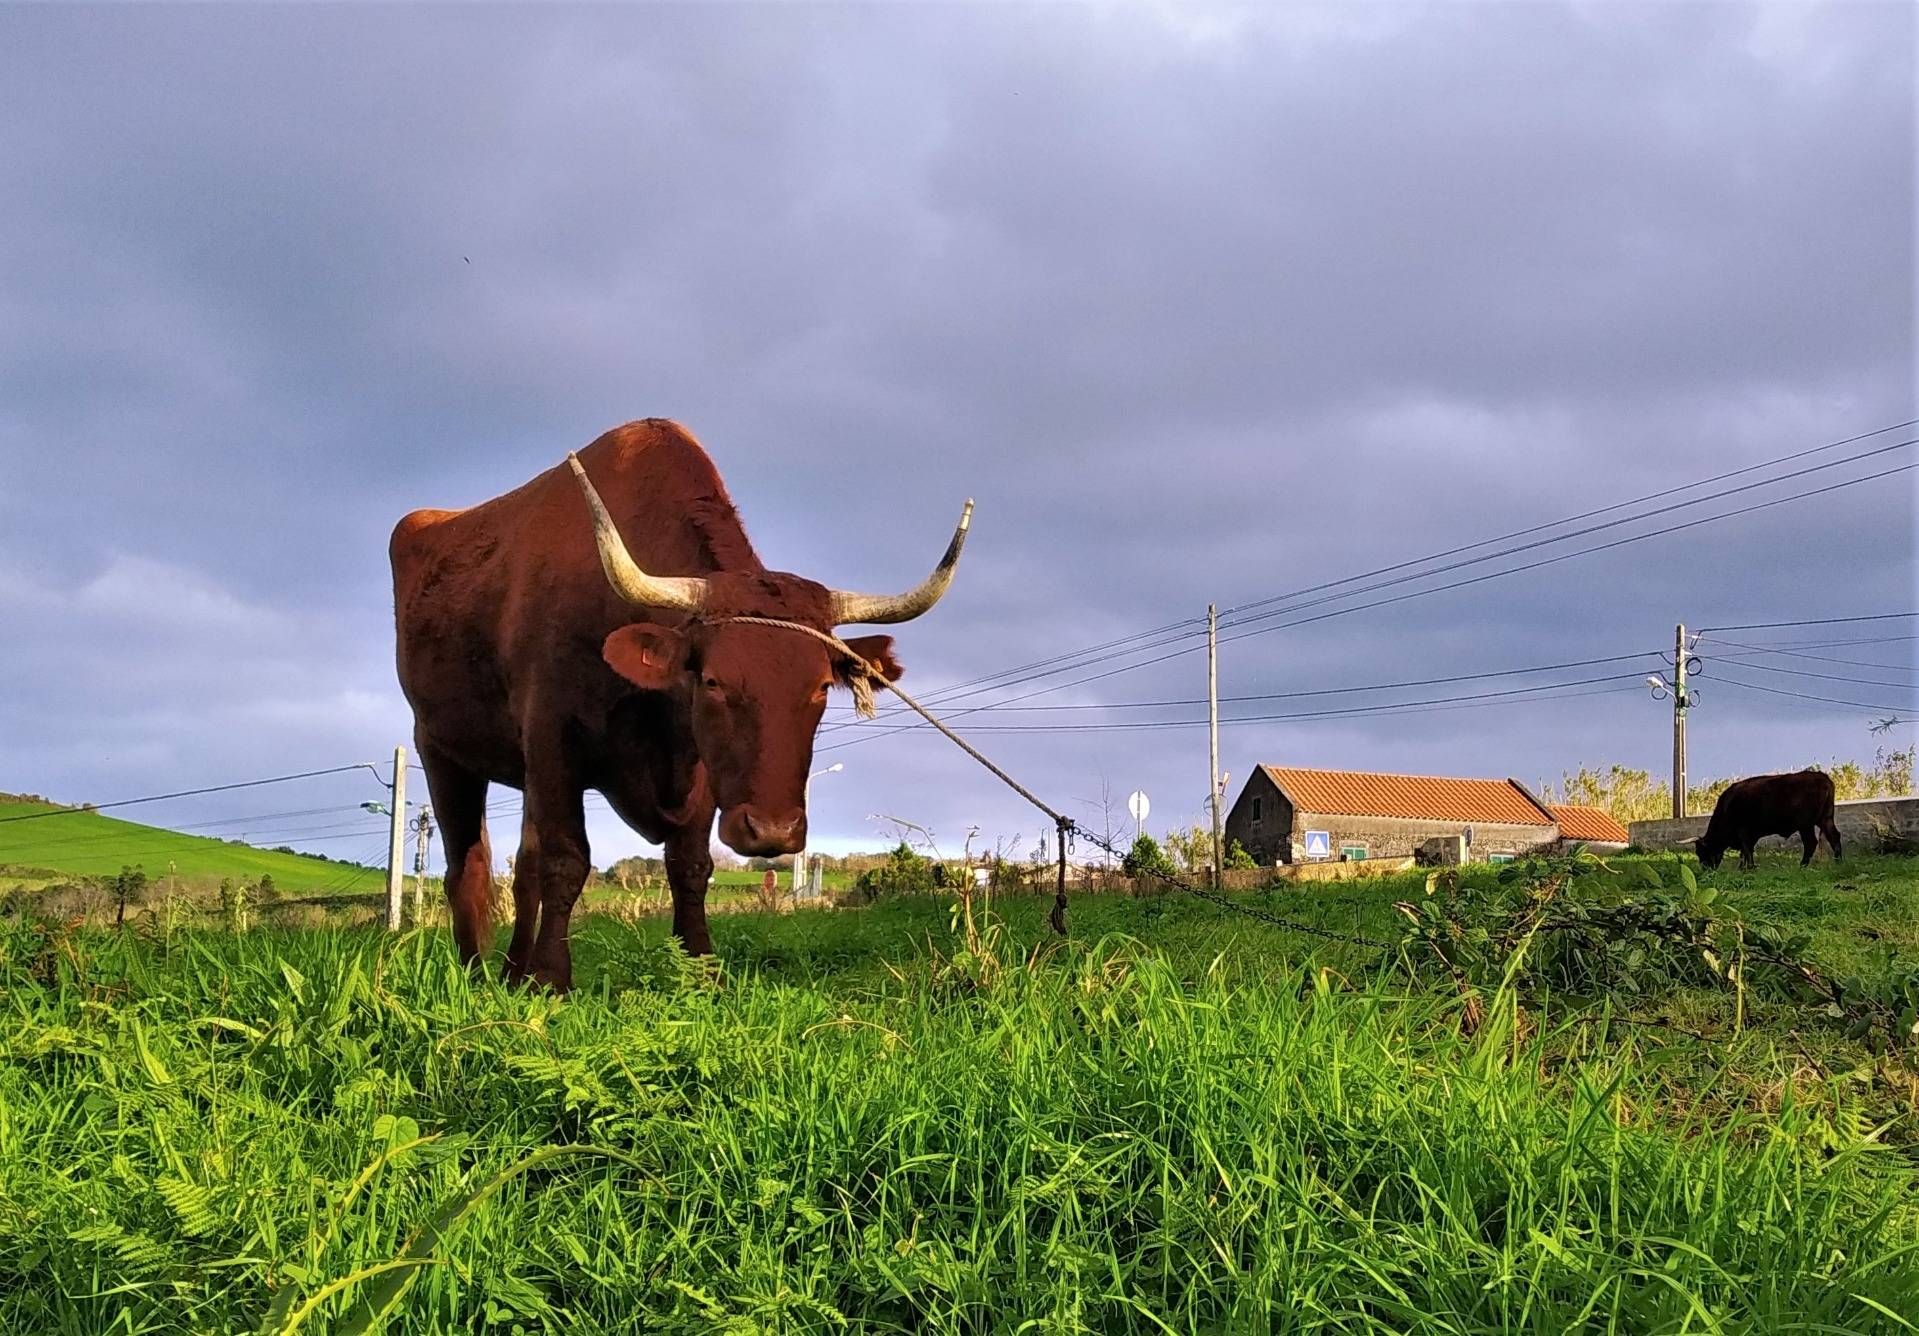 Beauties of Azores: magnificent bovine kingdom of Sao Miguel